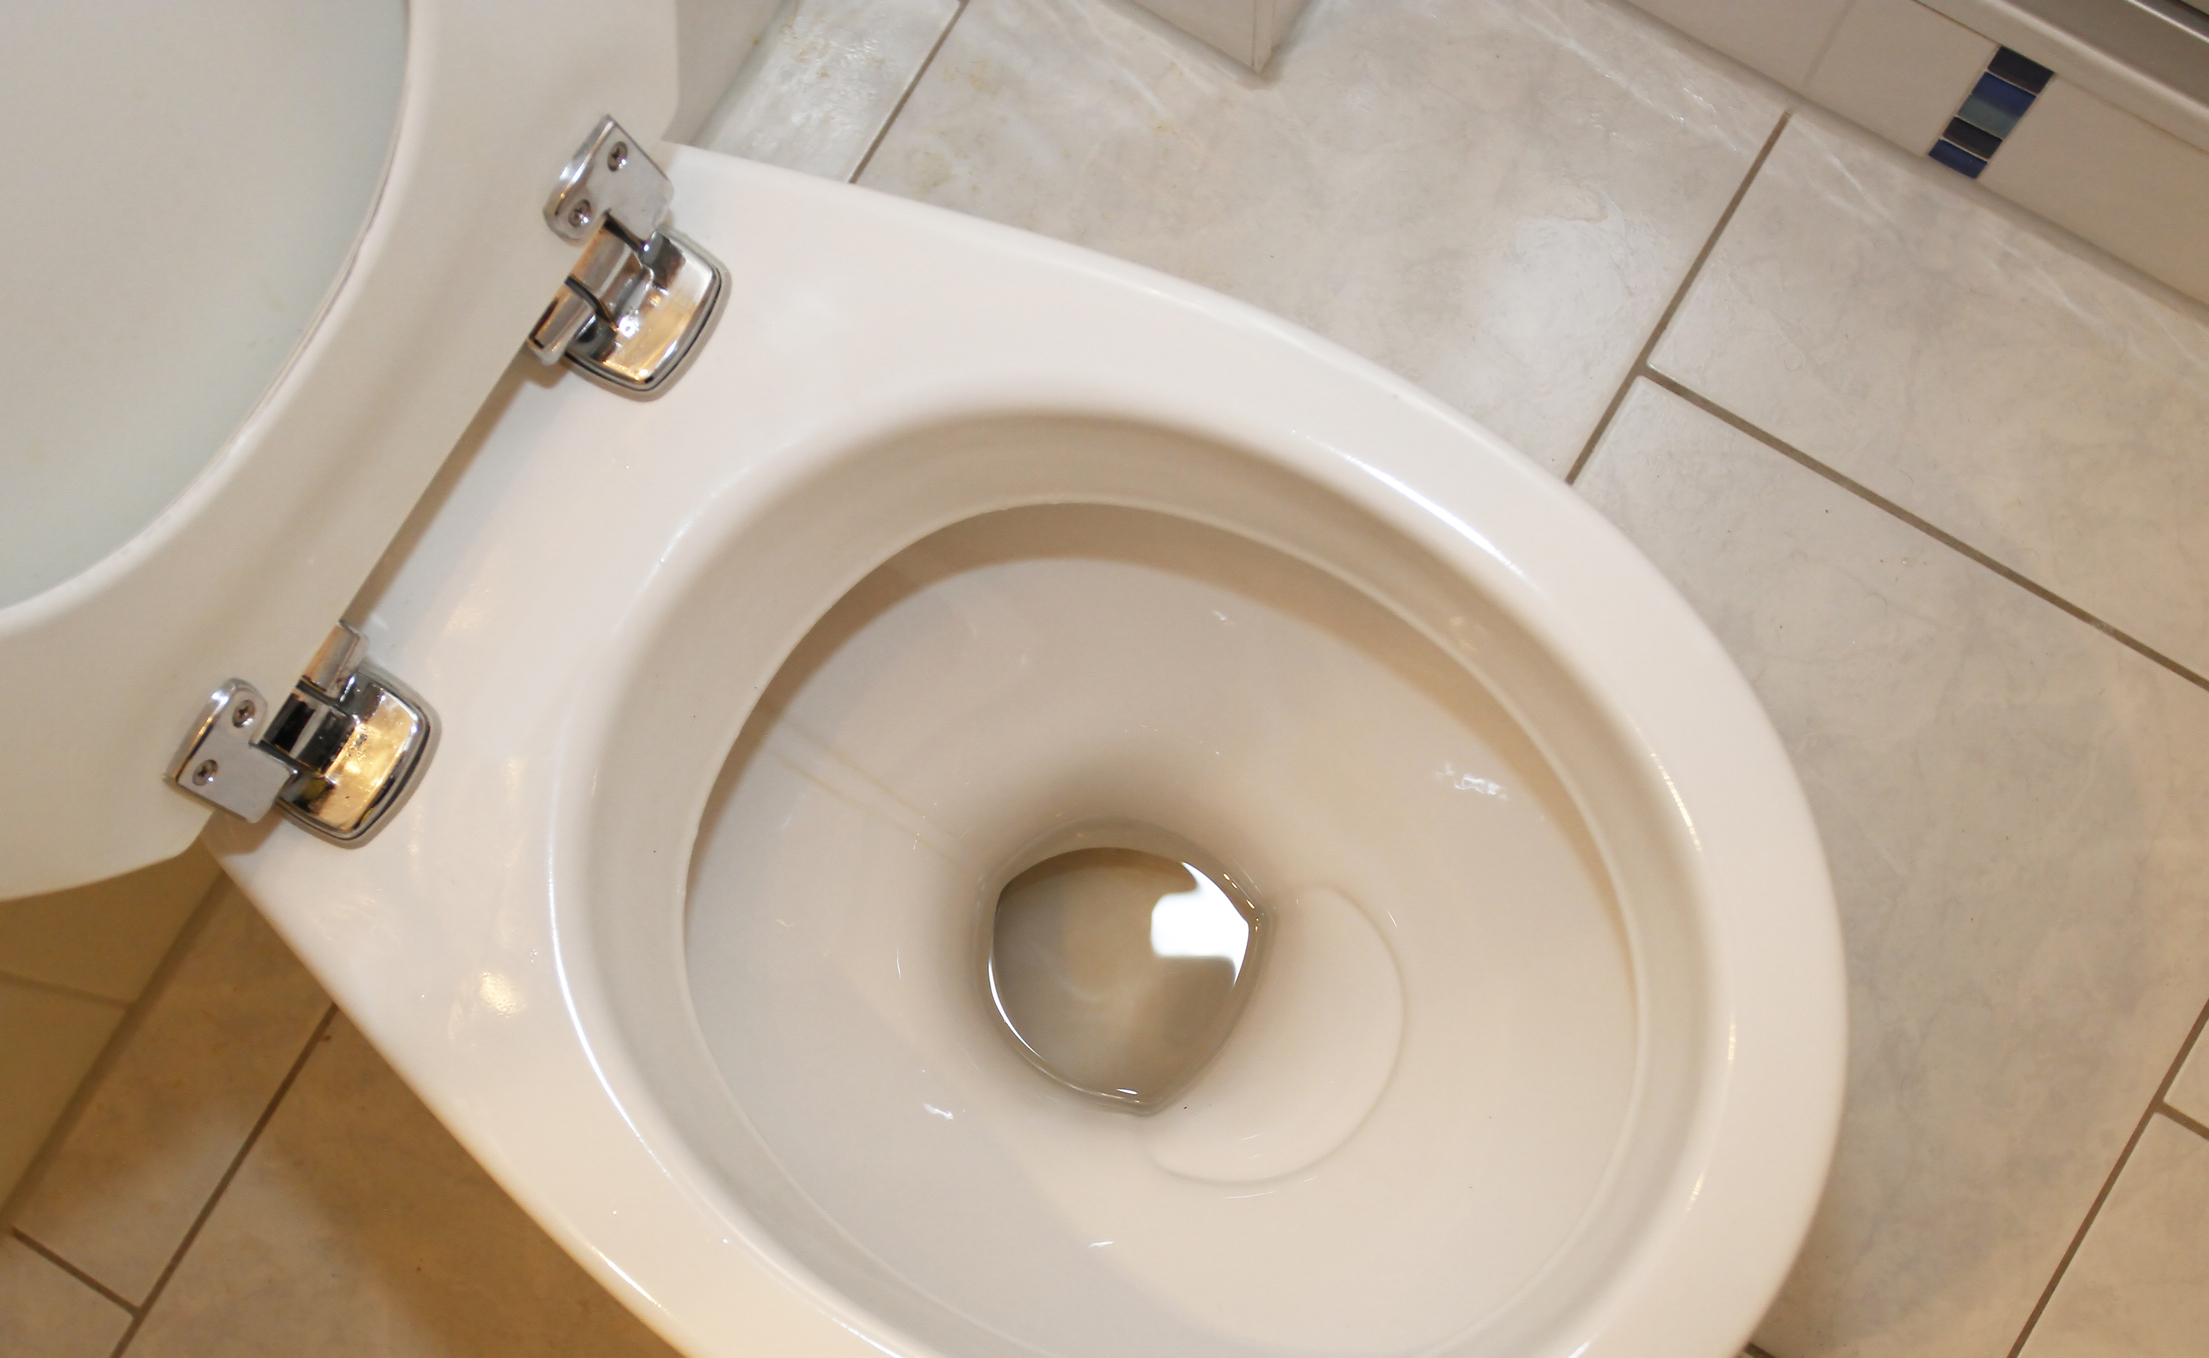 Close-up of an open toilet in a bathroom. No people are visible